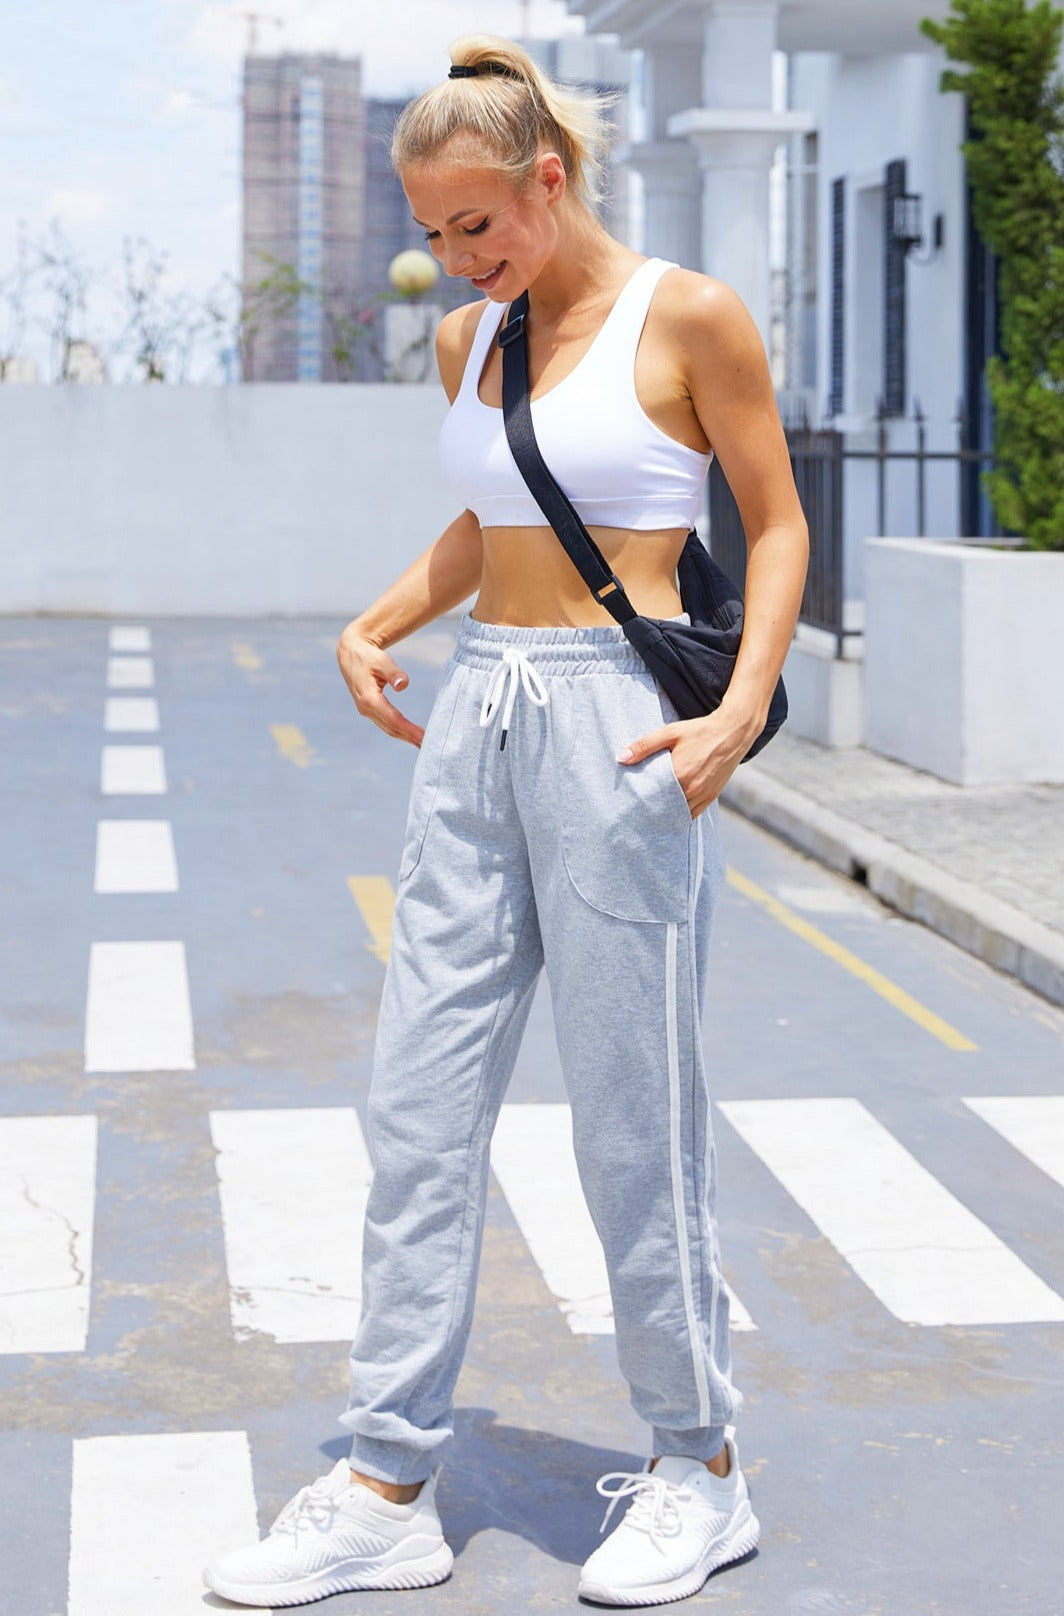 Women Jogger Workout Sweatpants with Pockets